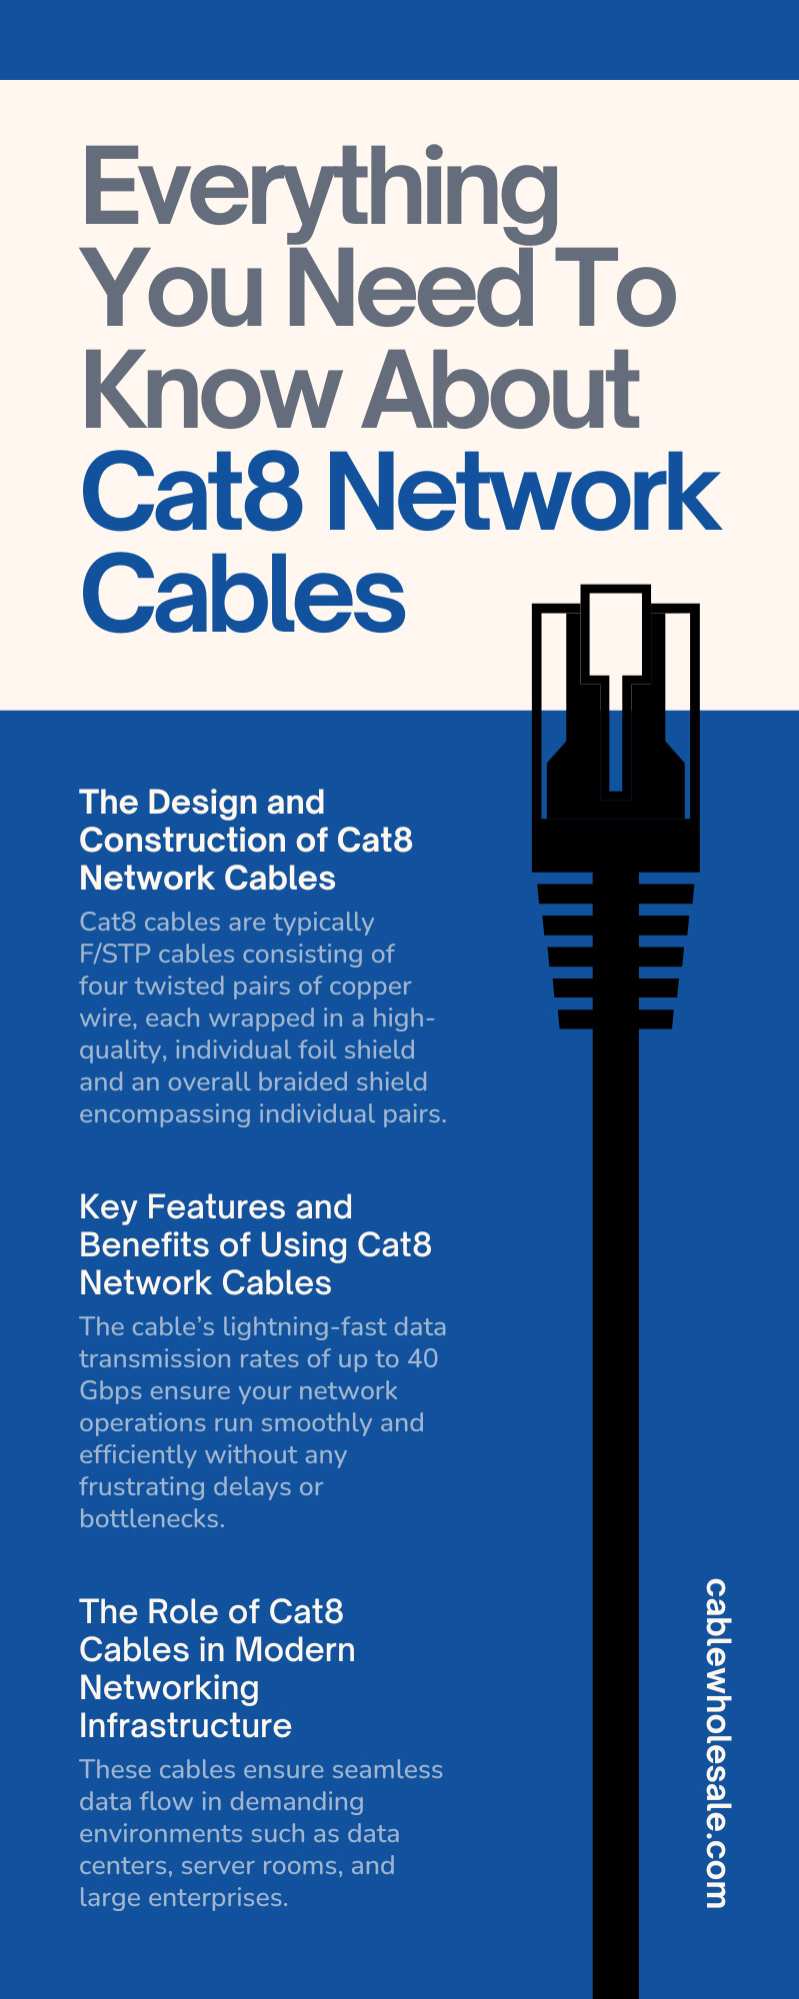 Everything You Need To Know About Cat8 Network Cables